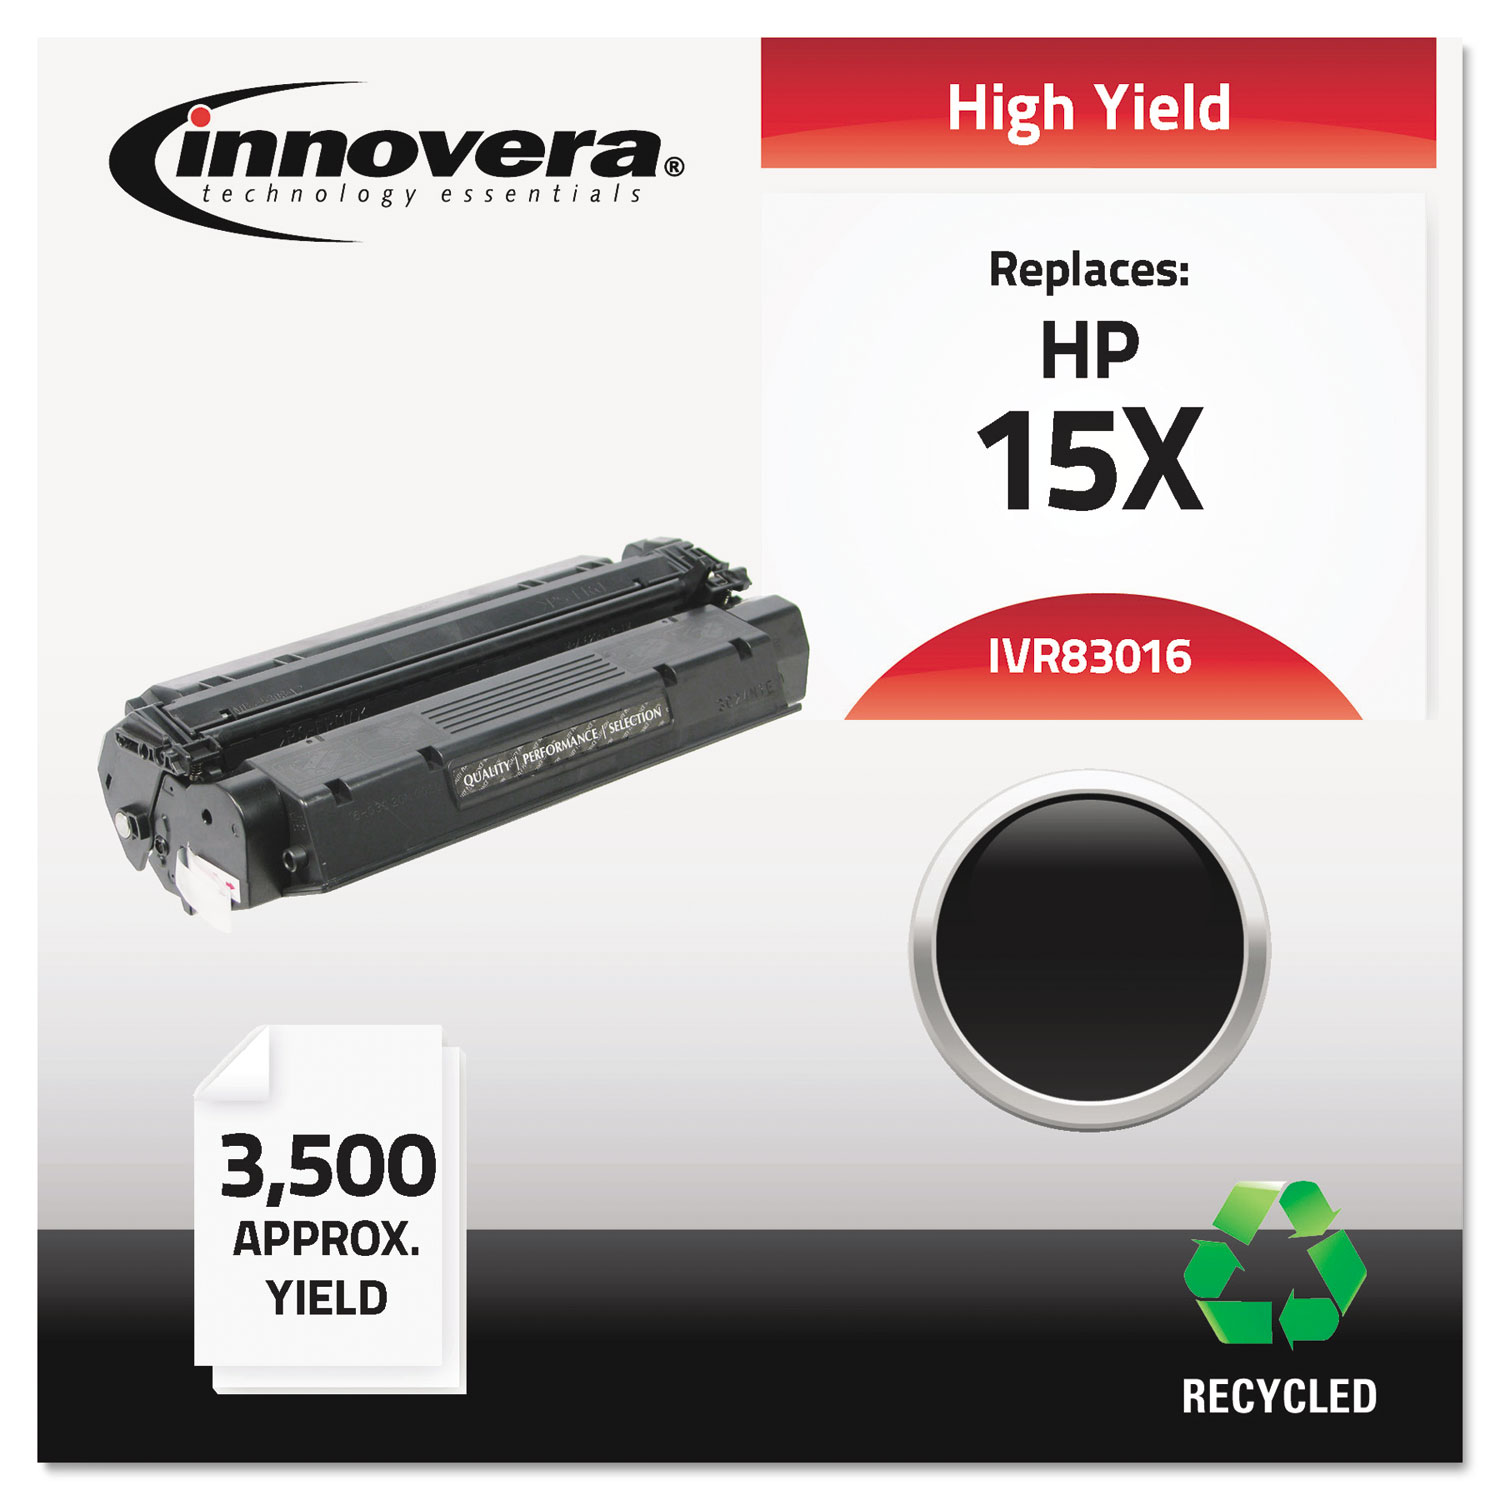  Innovera IVR83016 Remanufactured C7115X (15X) High-Yield Toner, 3500 Page-Yield, Black (IVR83016) 